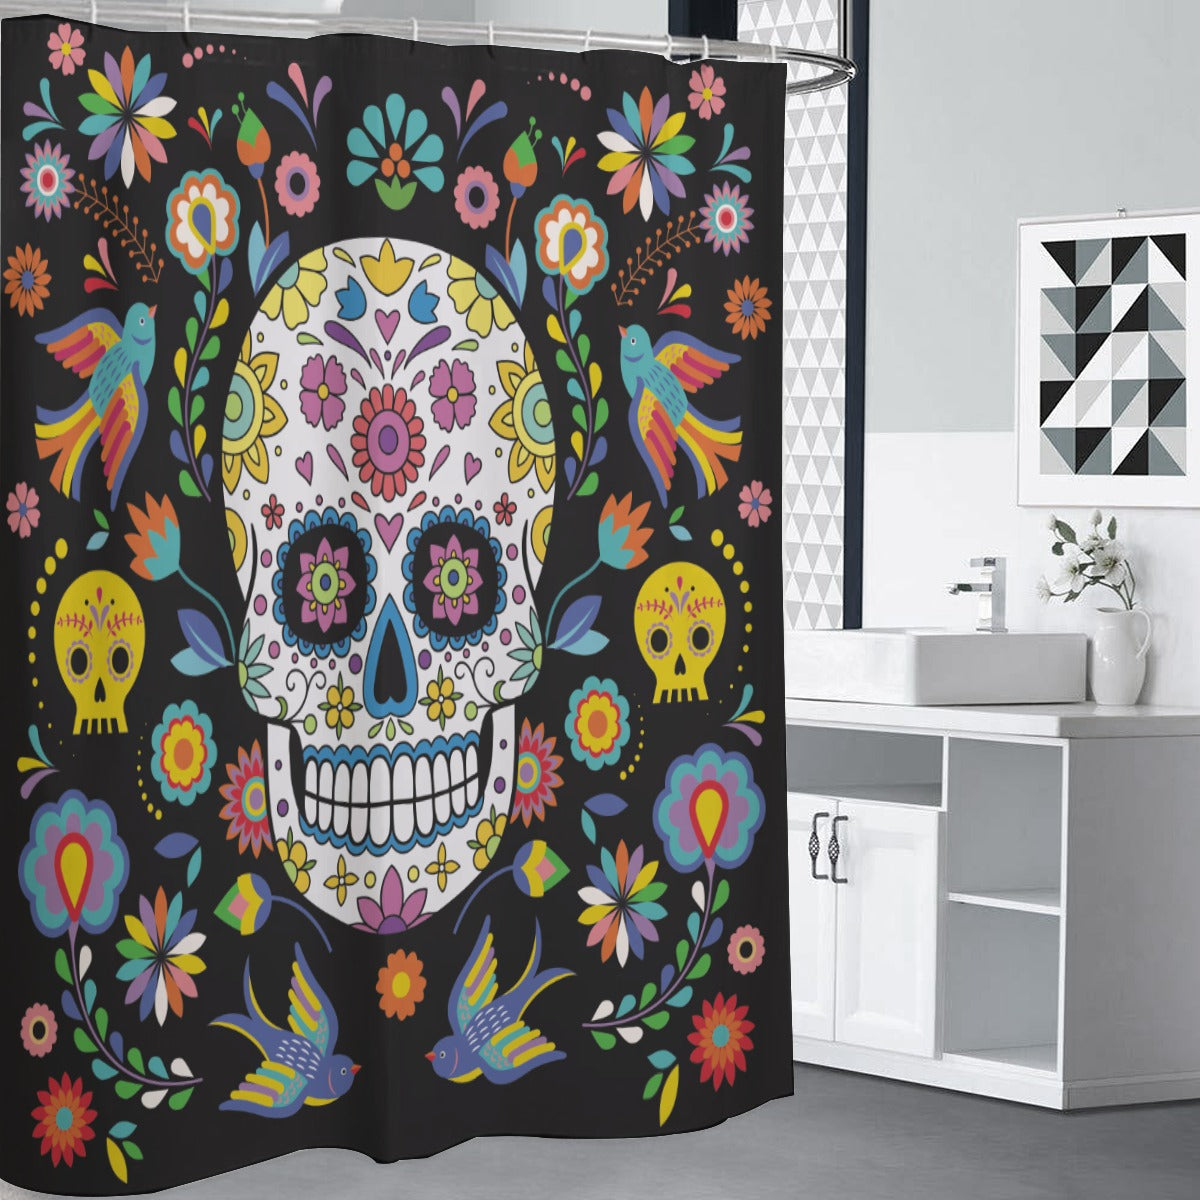 Sugar skull day of the dead Shower Curtains 150(gsm)